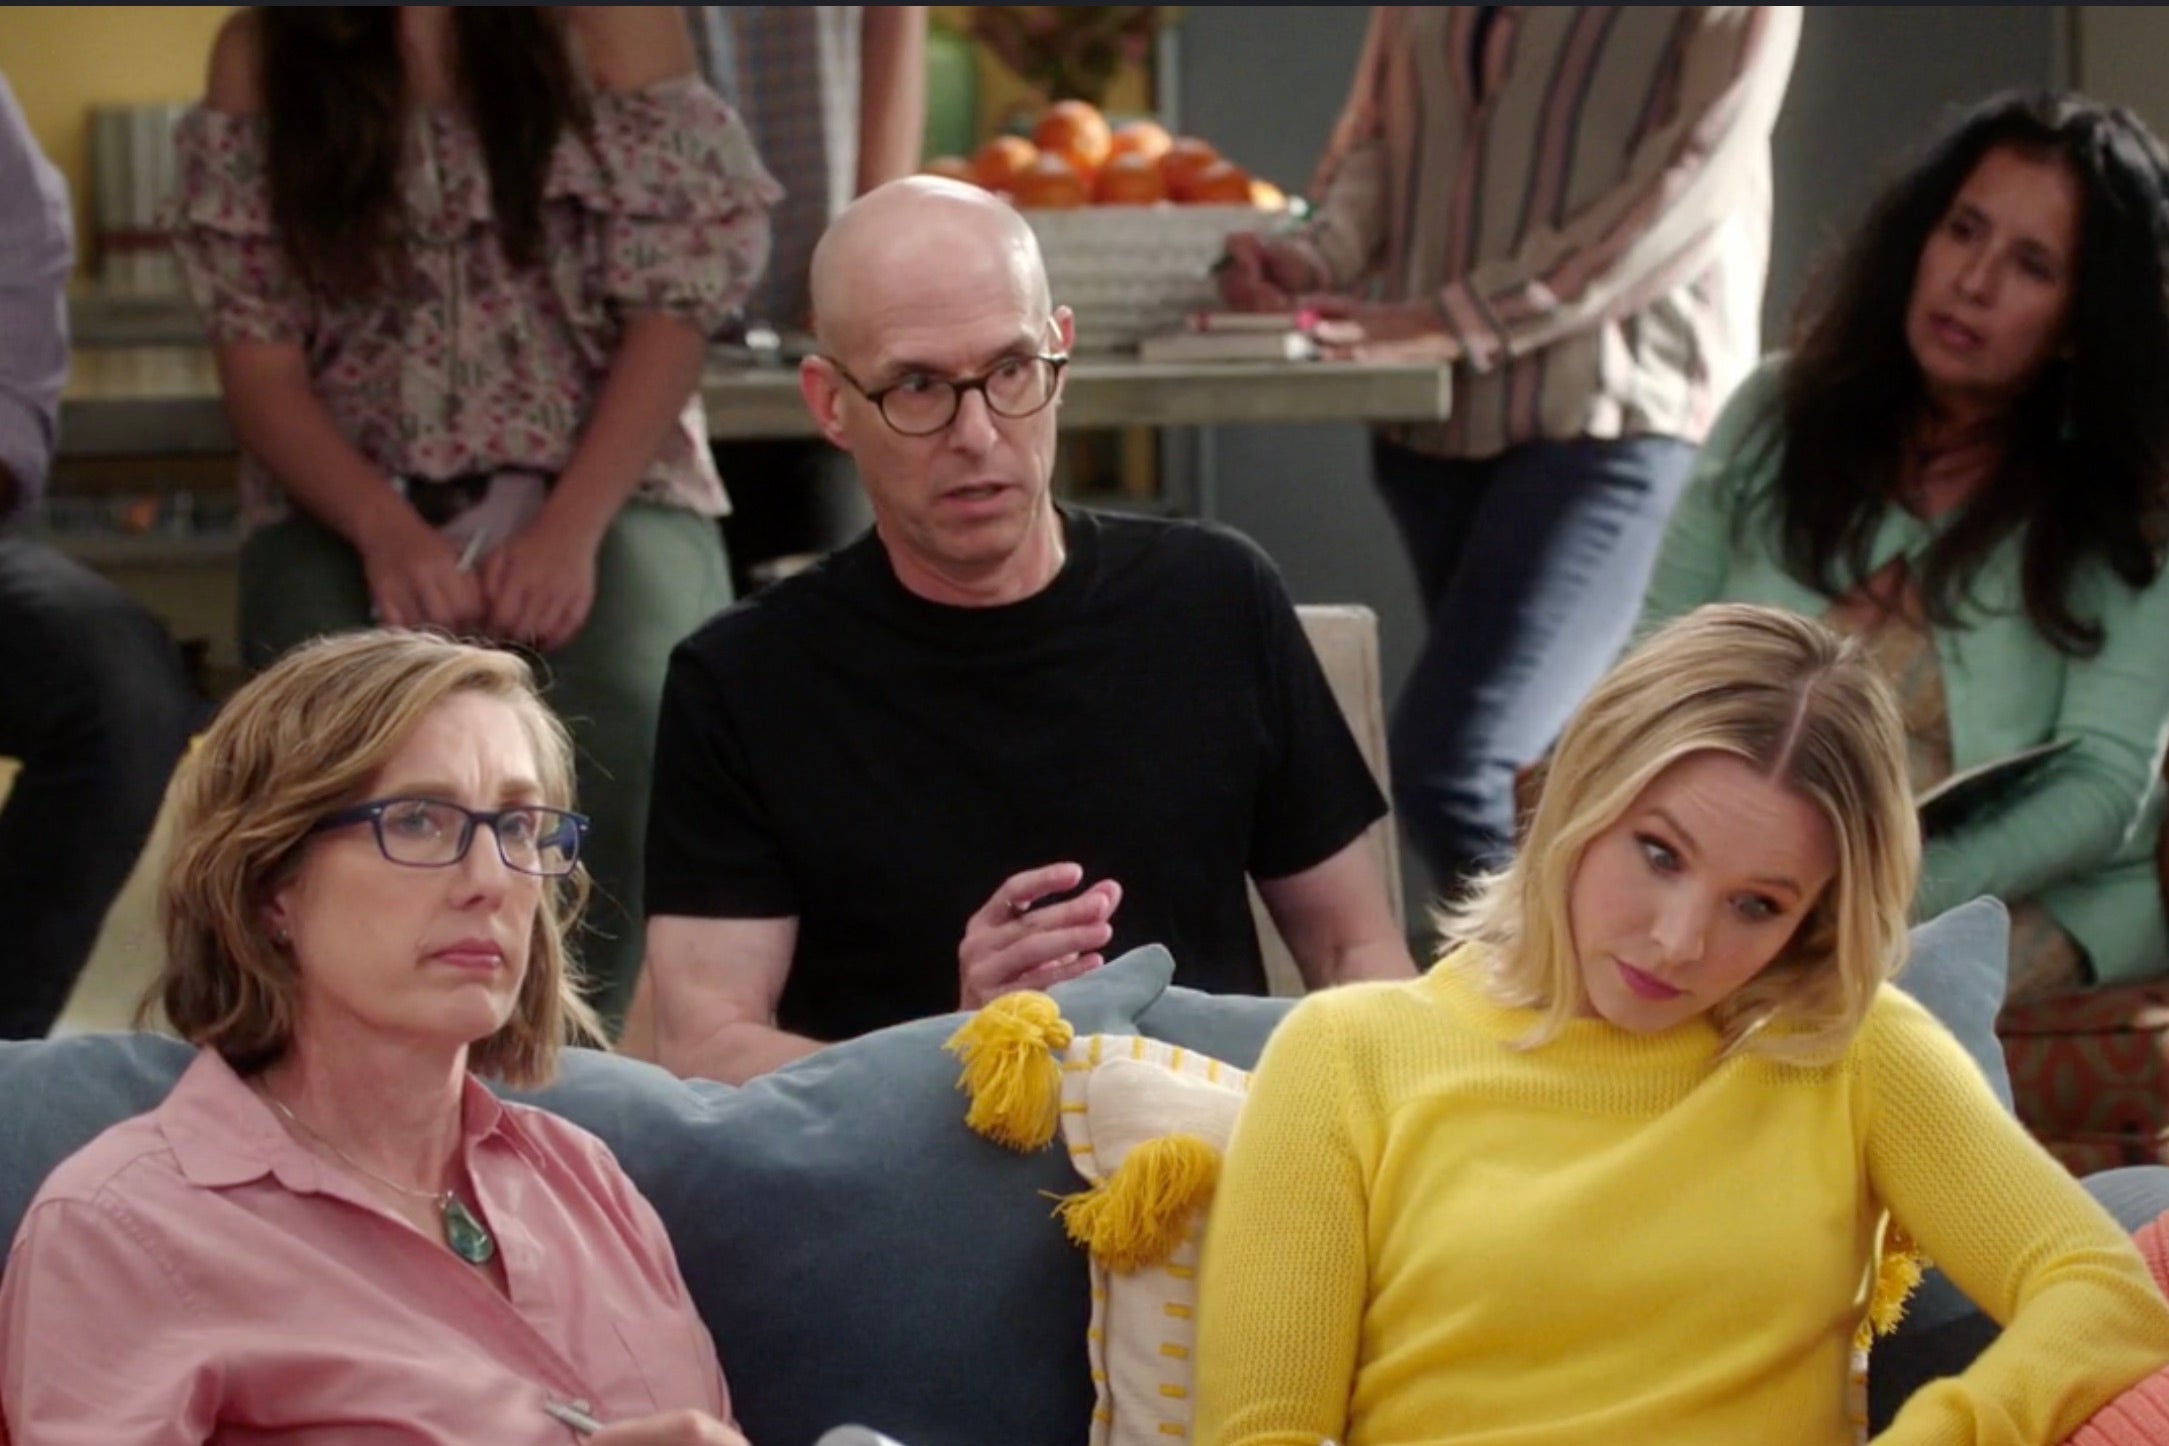 Todd May makes a point and Pamela Hieronymi listens while Eleanor (Kristen Bell) rolls her eyes